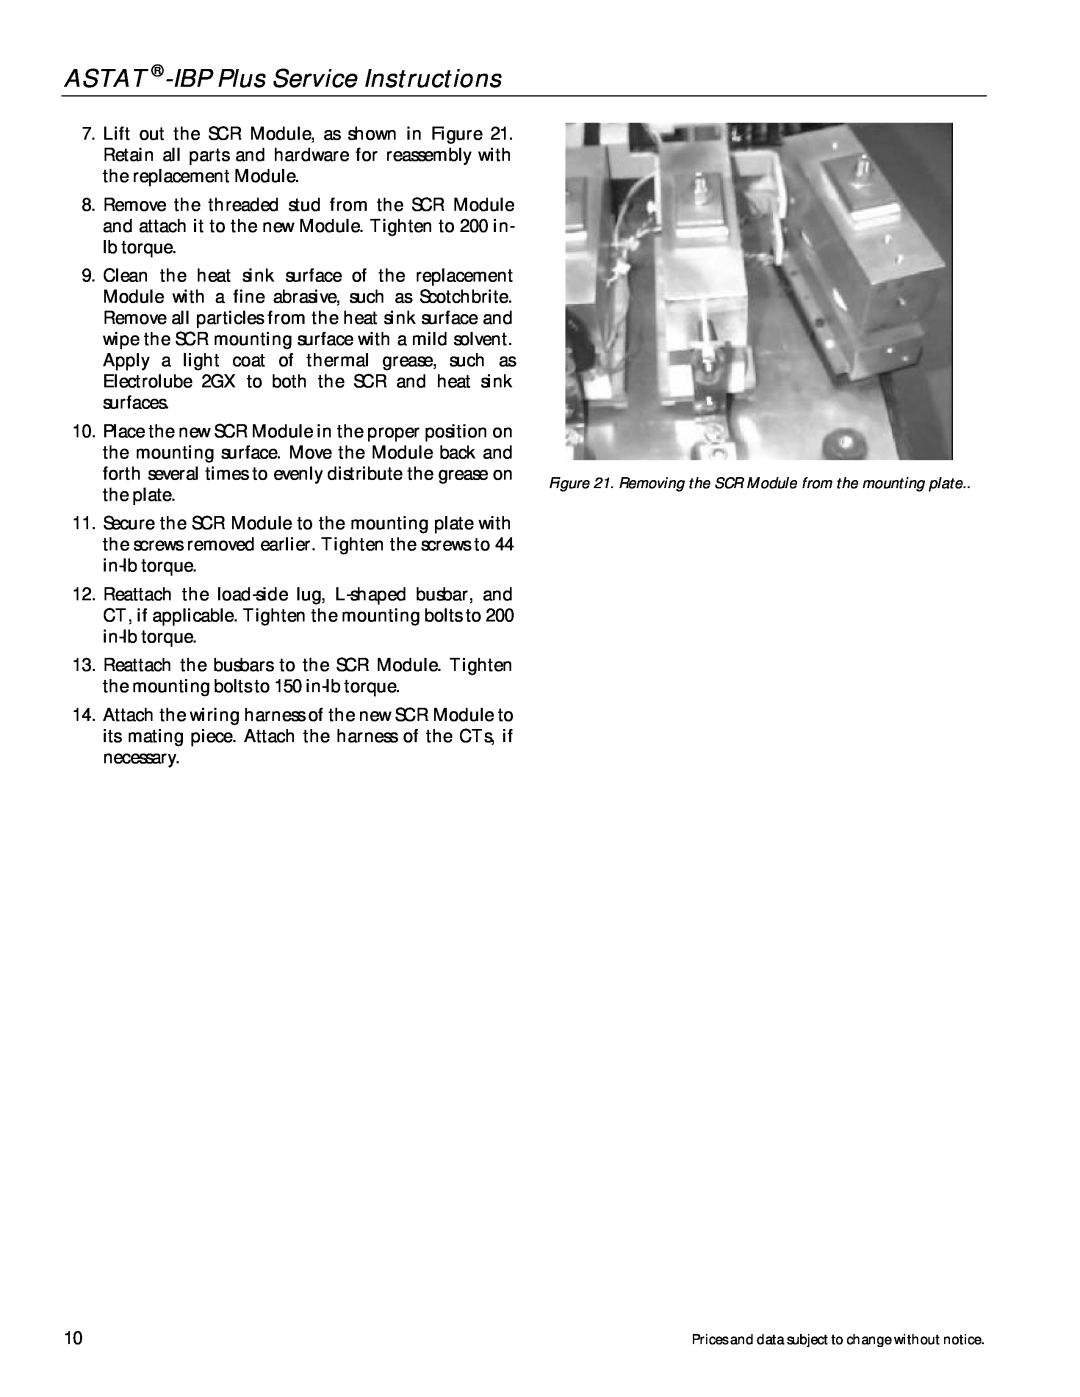 GE DEH-40417 manual ASTAT -IBP Plus Service Instructions, Removing the SCR Module from the mounting plate 